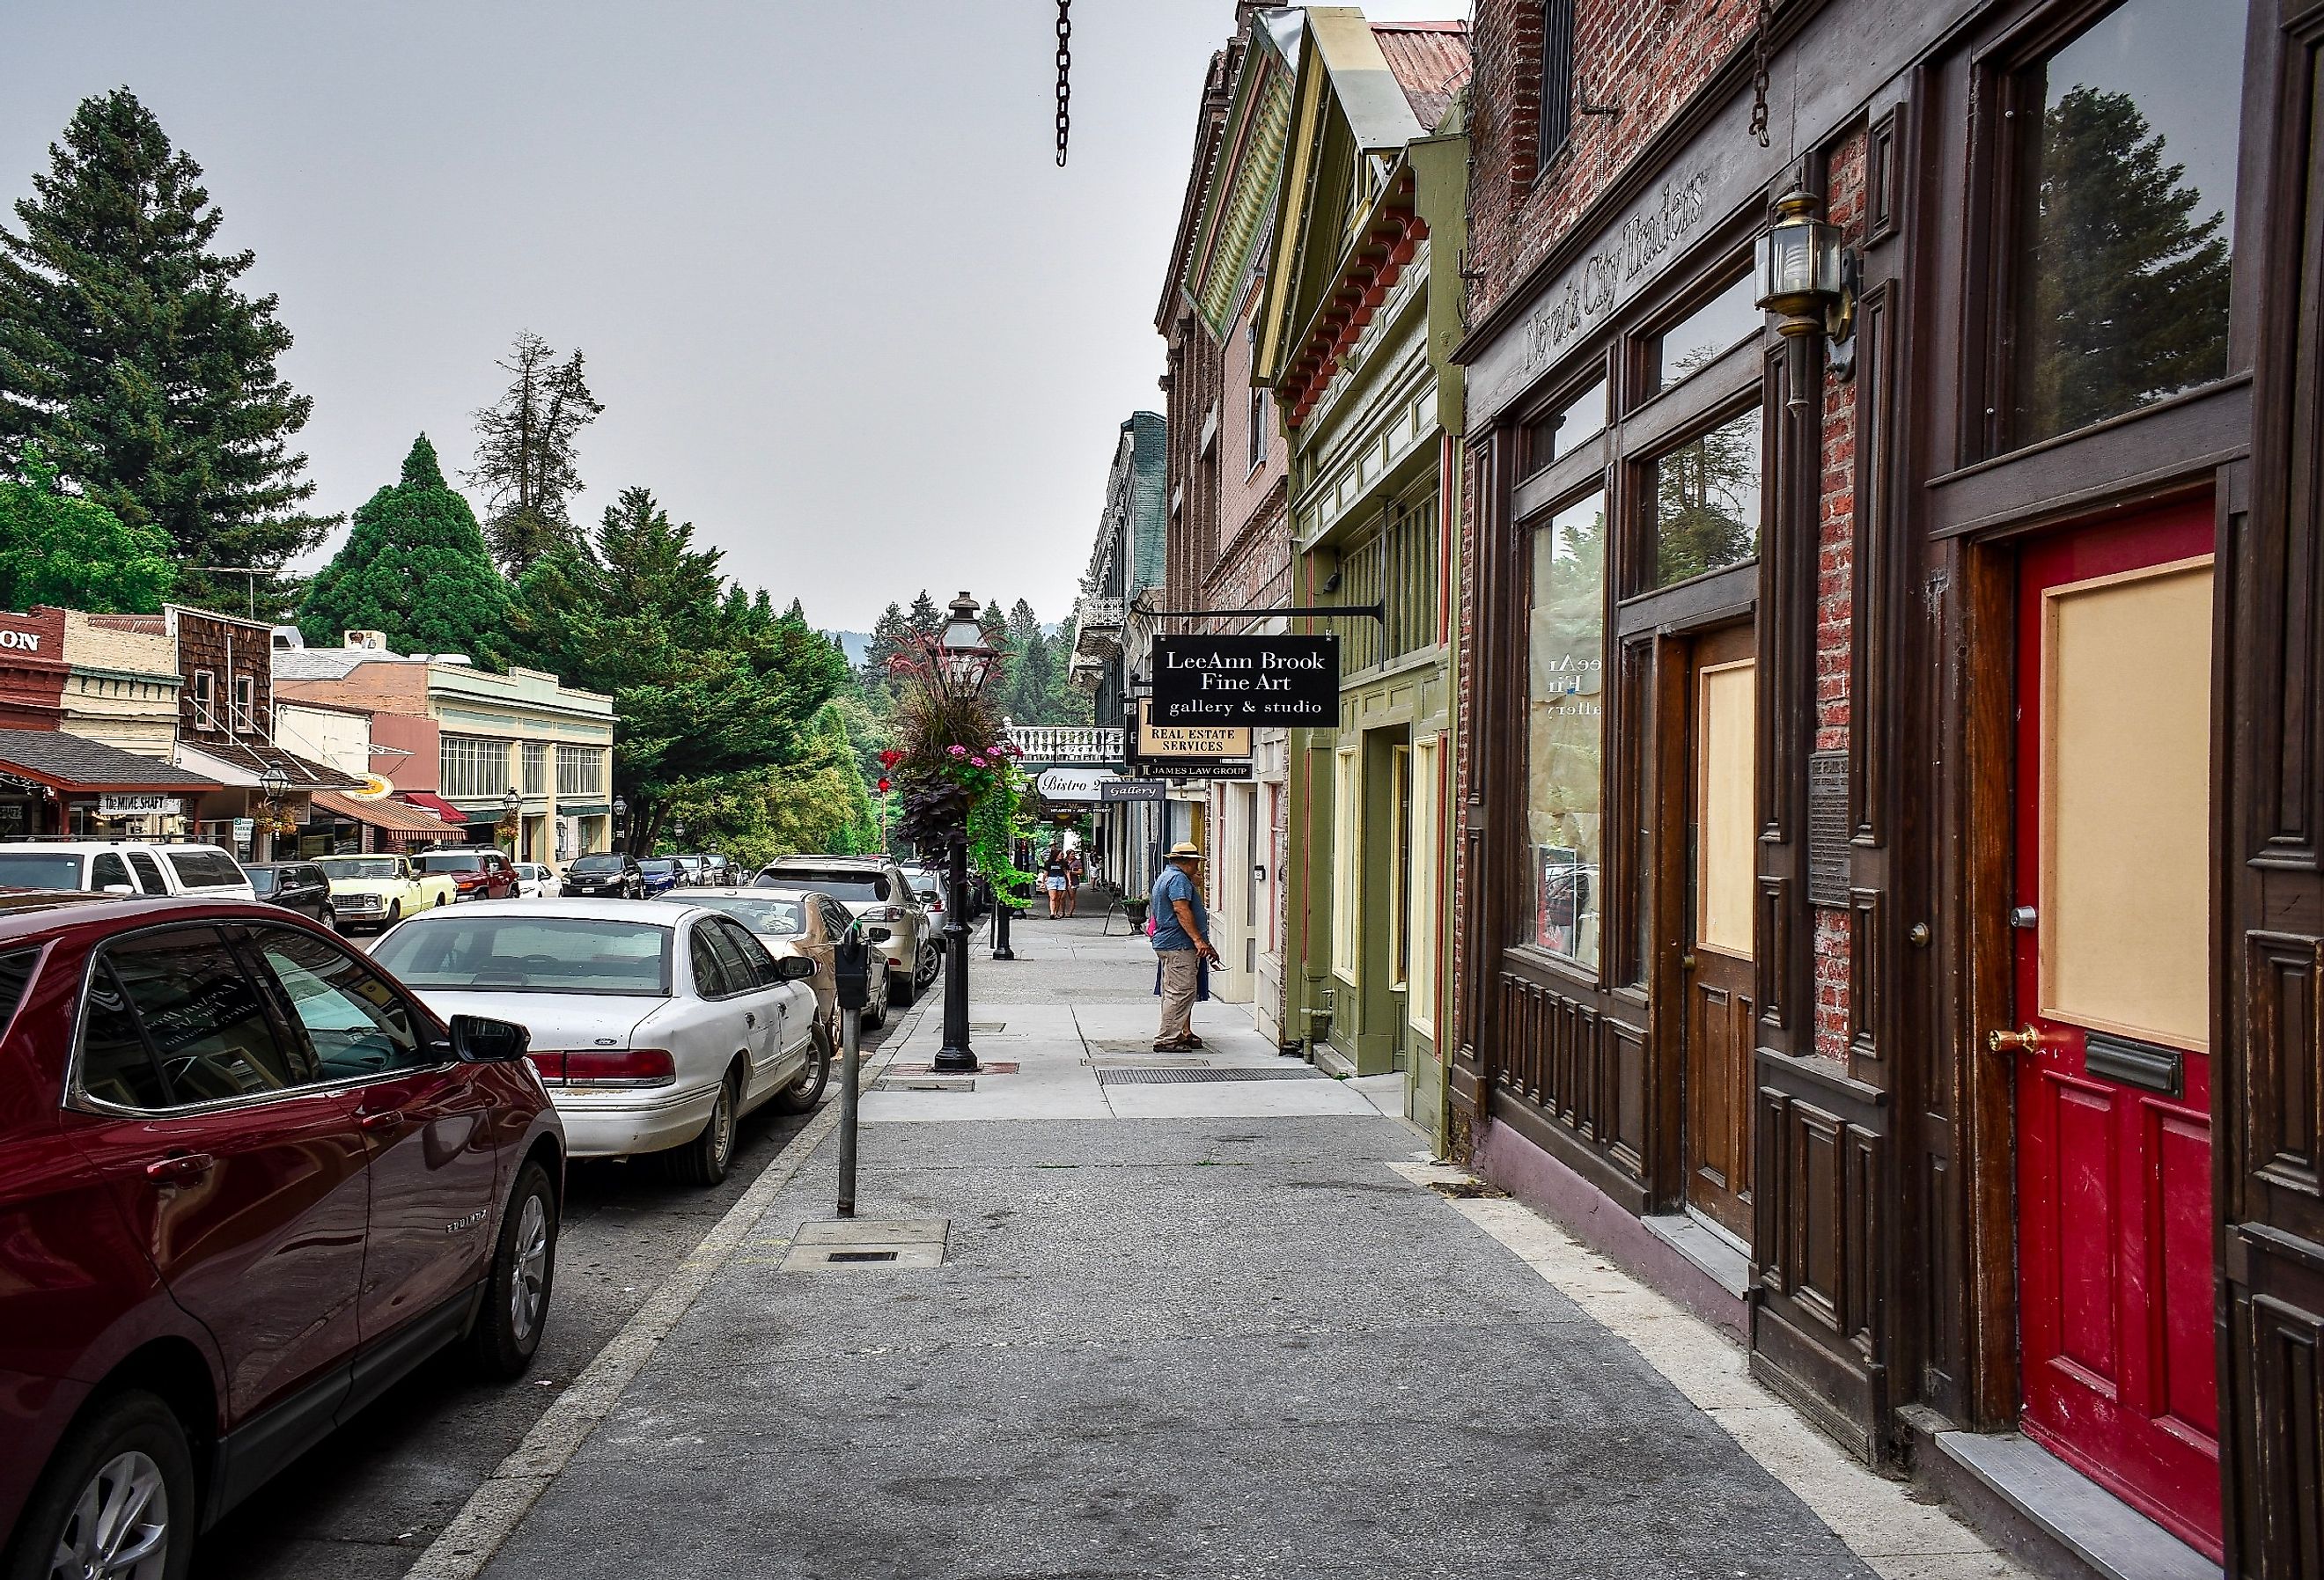 People spending time outside, walking this historic old town, Nevada city, California. Image credit Devin Powers via Shutterstock